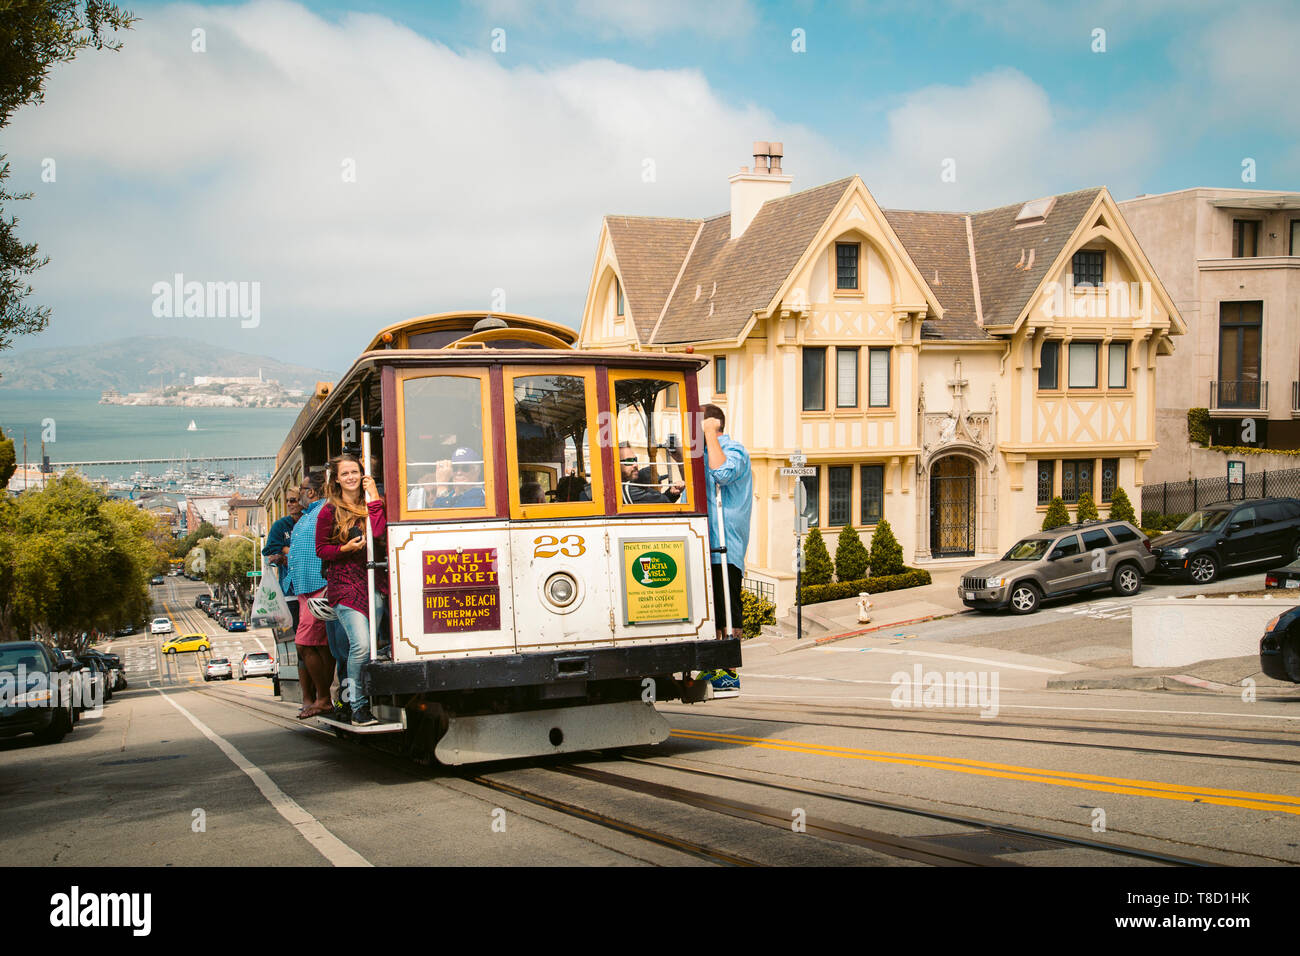 SEPTEMBER 3, 2016 - SAN FRANCISCO: Powell-Hyde cable car climbing up steep hill in central San Francisco with famous Alcatraz Island in the background Stock Photo